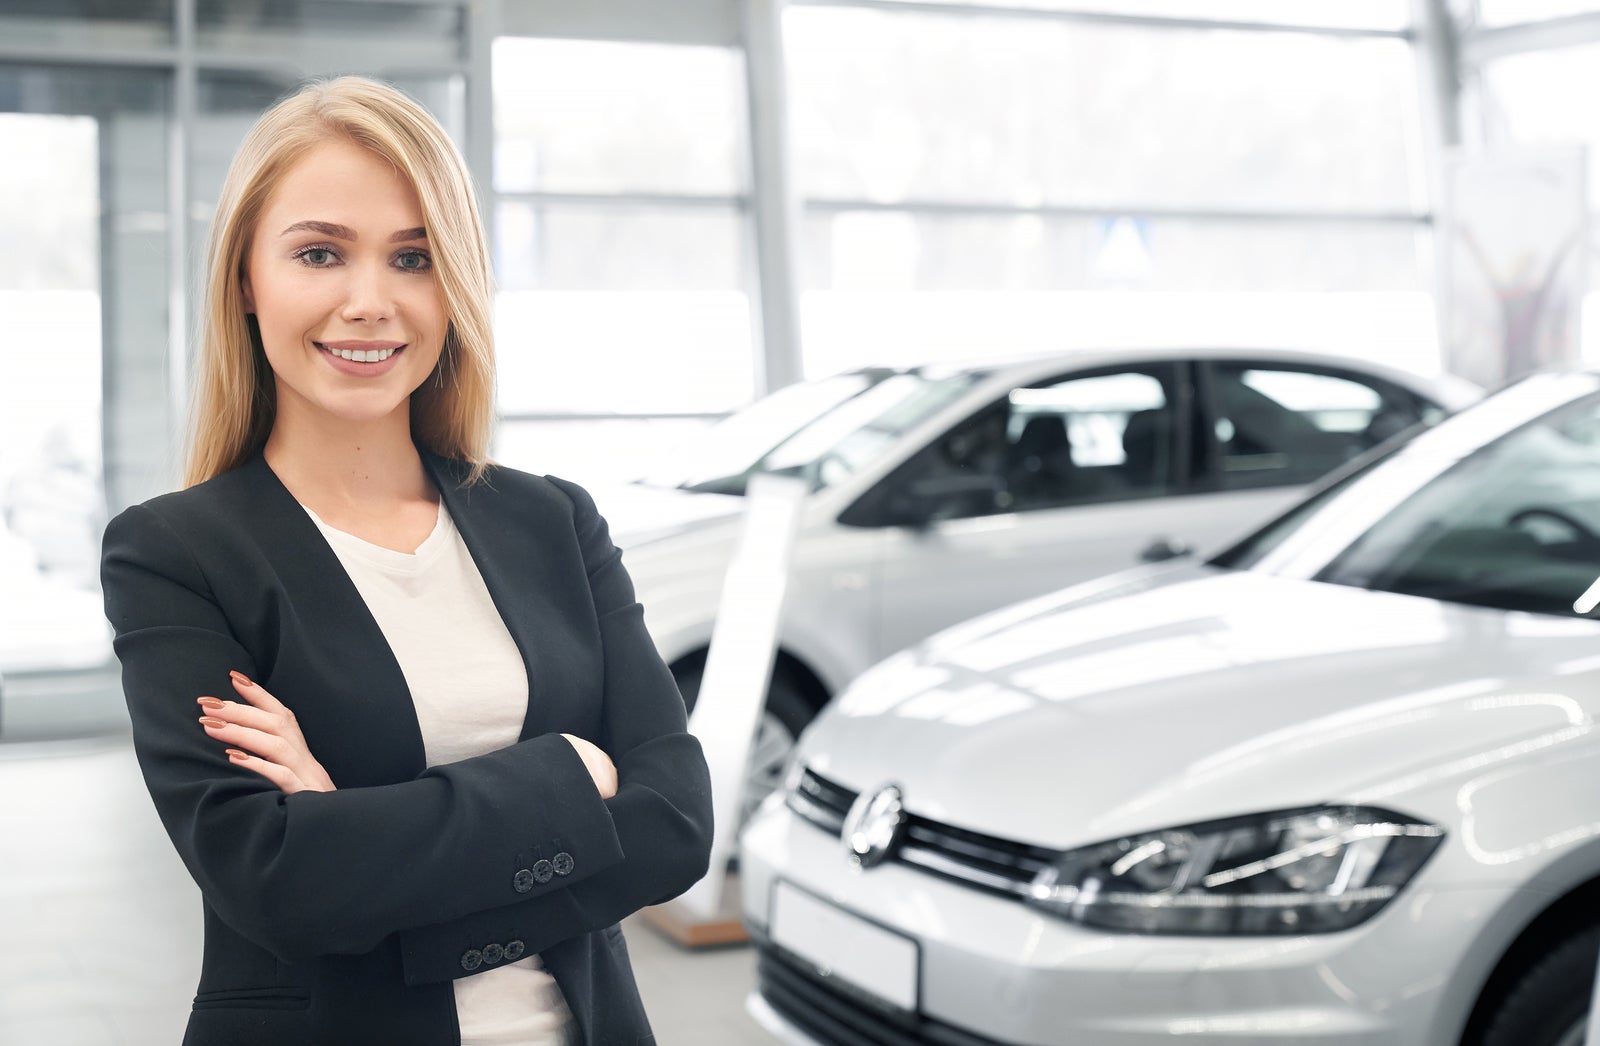 How to Start a Car Rental Business in 12 Steps